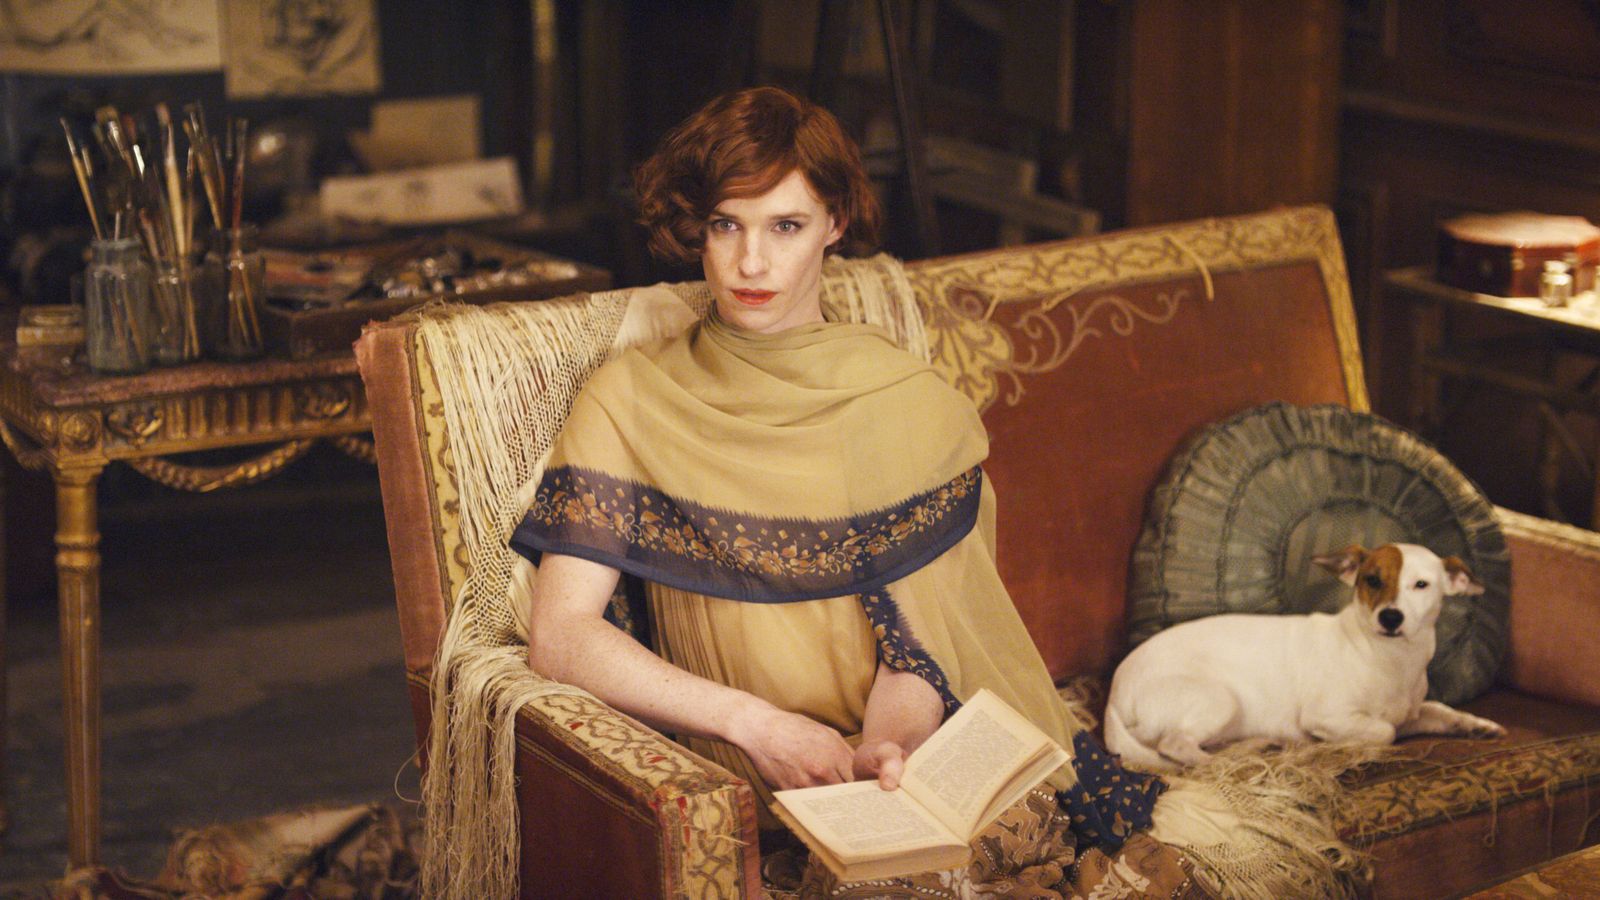 Eddie Redmayne regrets playing trans woman in The Danish Girl, saying it was a ‘mistake’